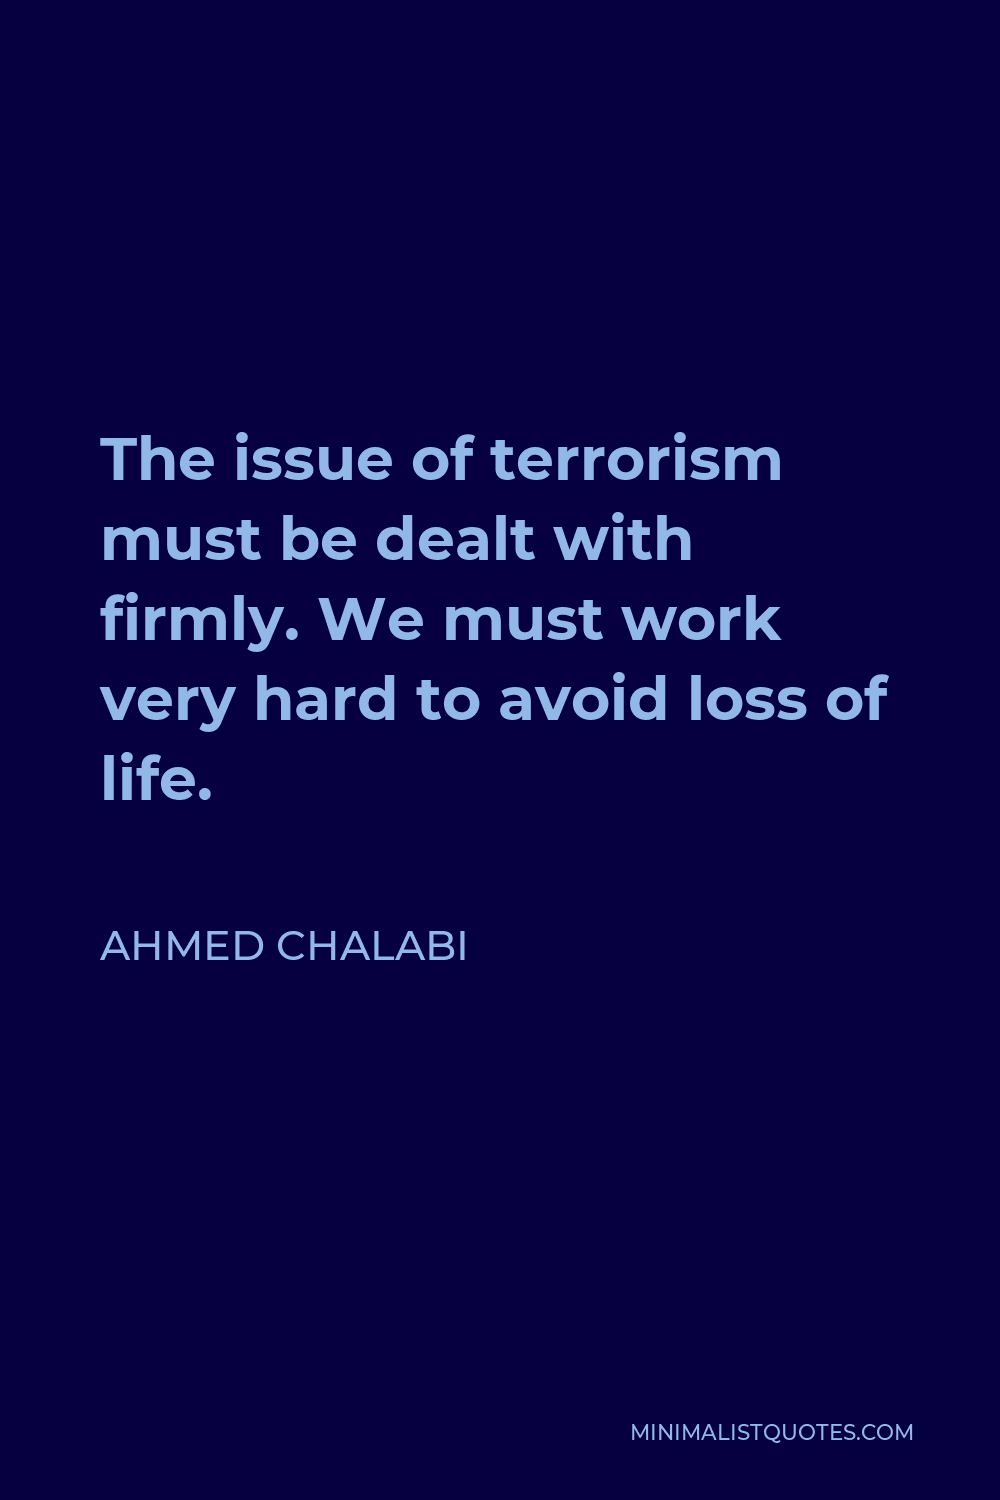 Ahmed Chalabi Quote - The issue of terrorism must be dealt with firmly. We must work very hard to avoid loss of life.